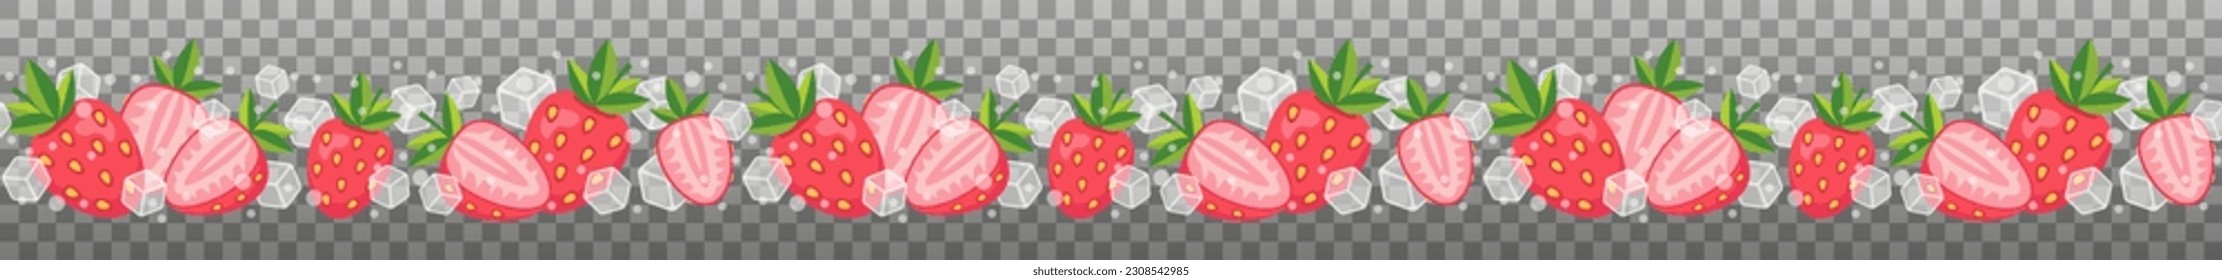 Seamless border with strawberry, ice cubes and bubbles. Can be used for summer cards, letters, invitations. Isolated vector and PNG illustration on transparent background.